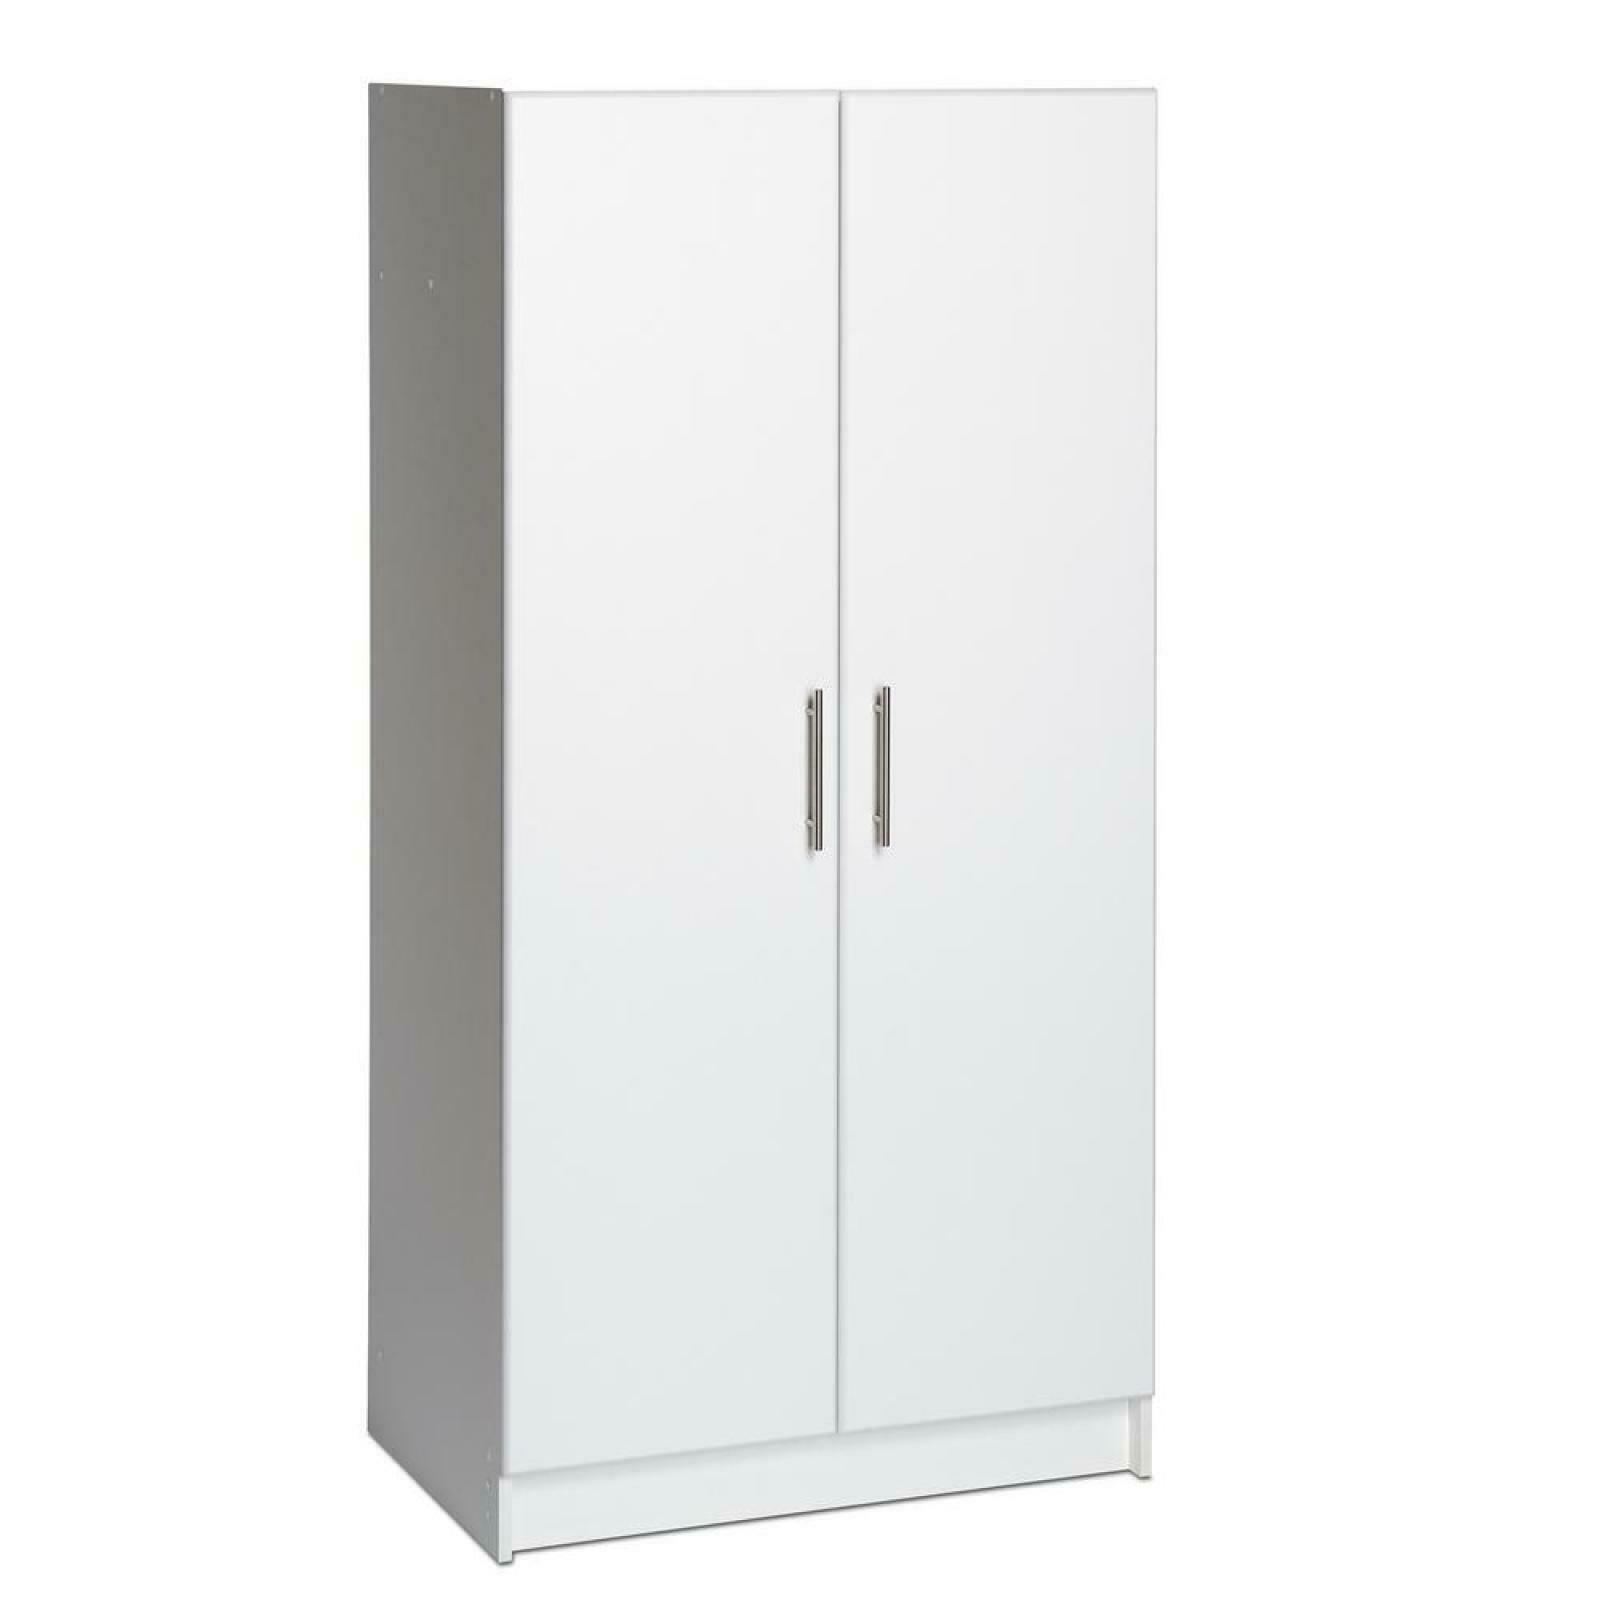 Storage Cabinets With Doors Visualhunt, White Storage Cabinets With Doors And Shelves